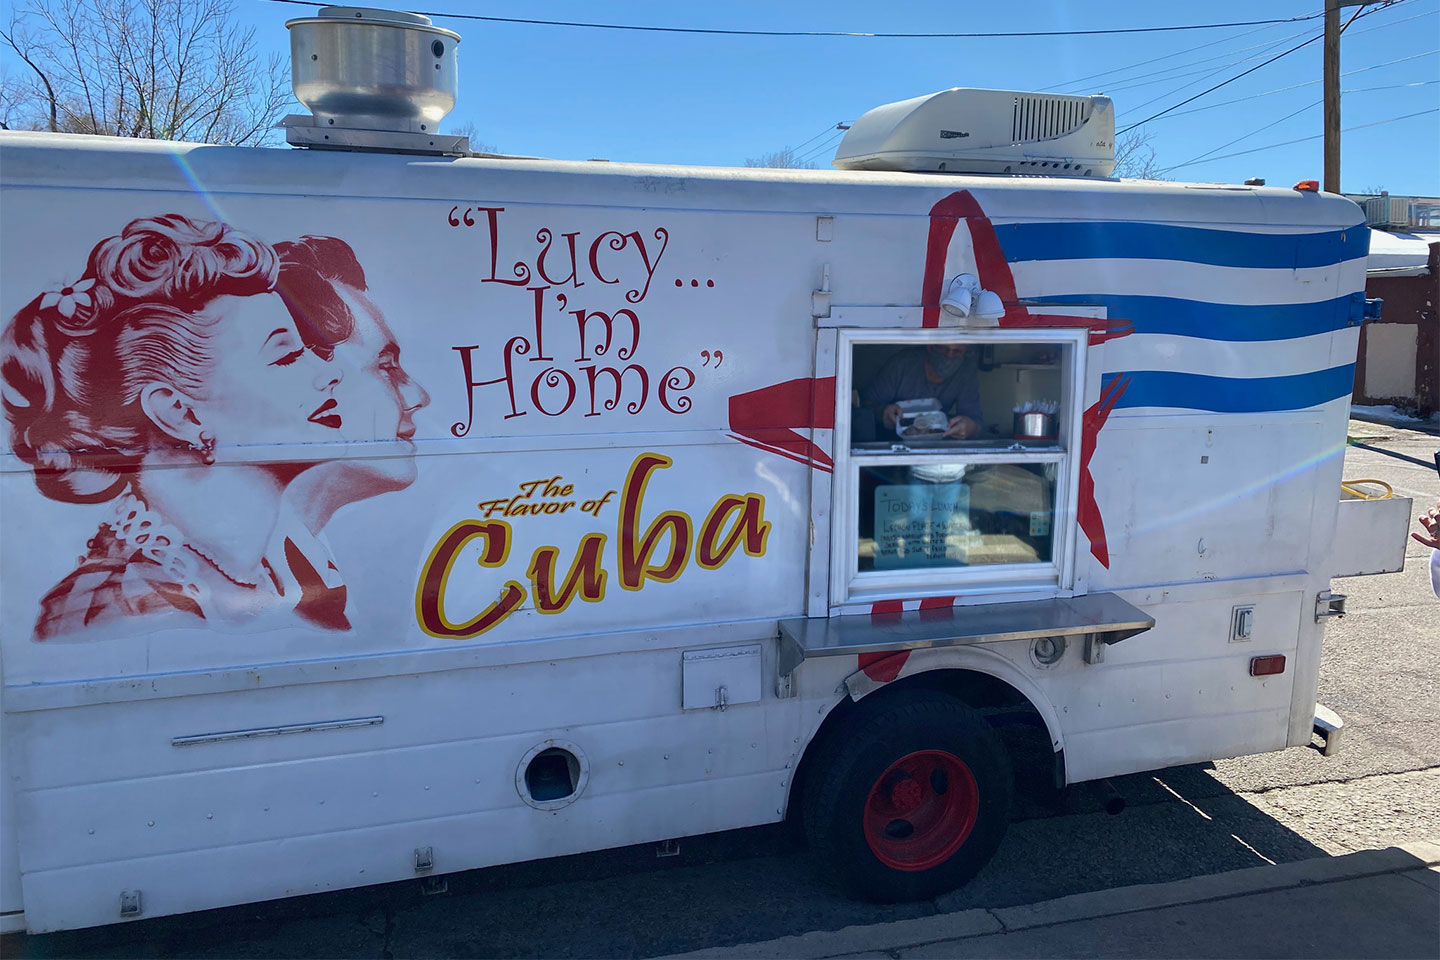 "Lucy I'm Home" is a food truck and take out spot at 390 N. Circle in Colorado Springs. We are a family run business offering fresh, daily made Cuban cuisine.
https://www.facebook.com/lucyimhomefoodtruck